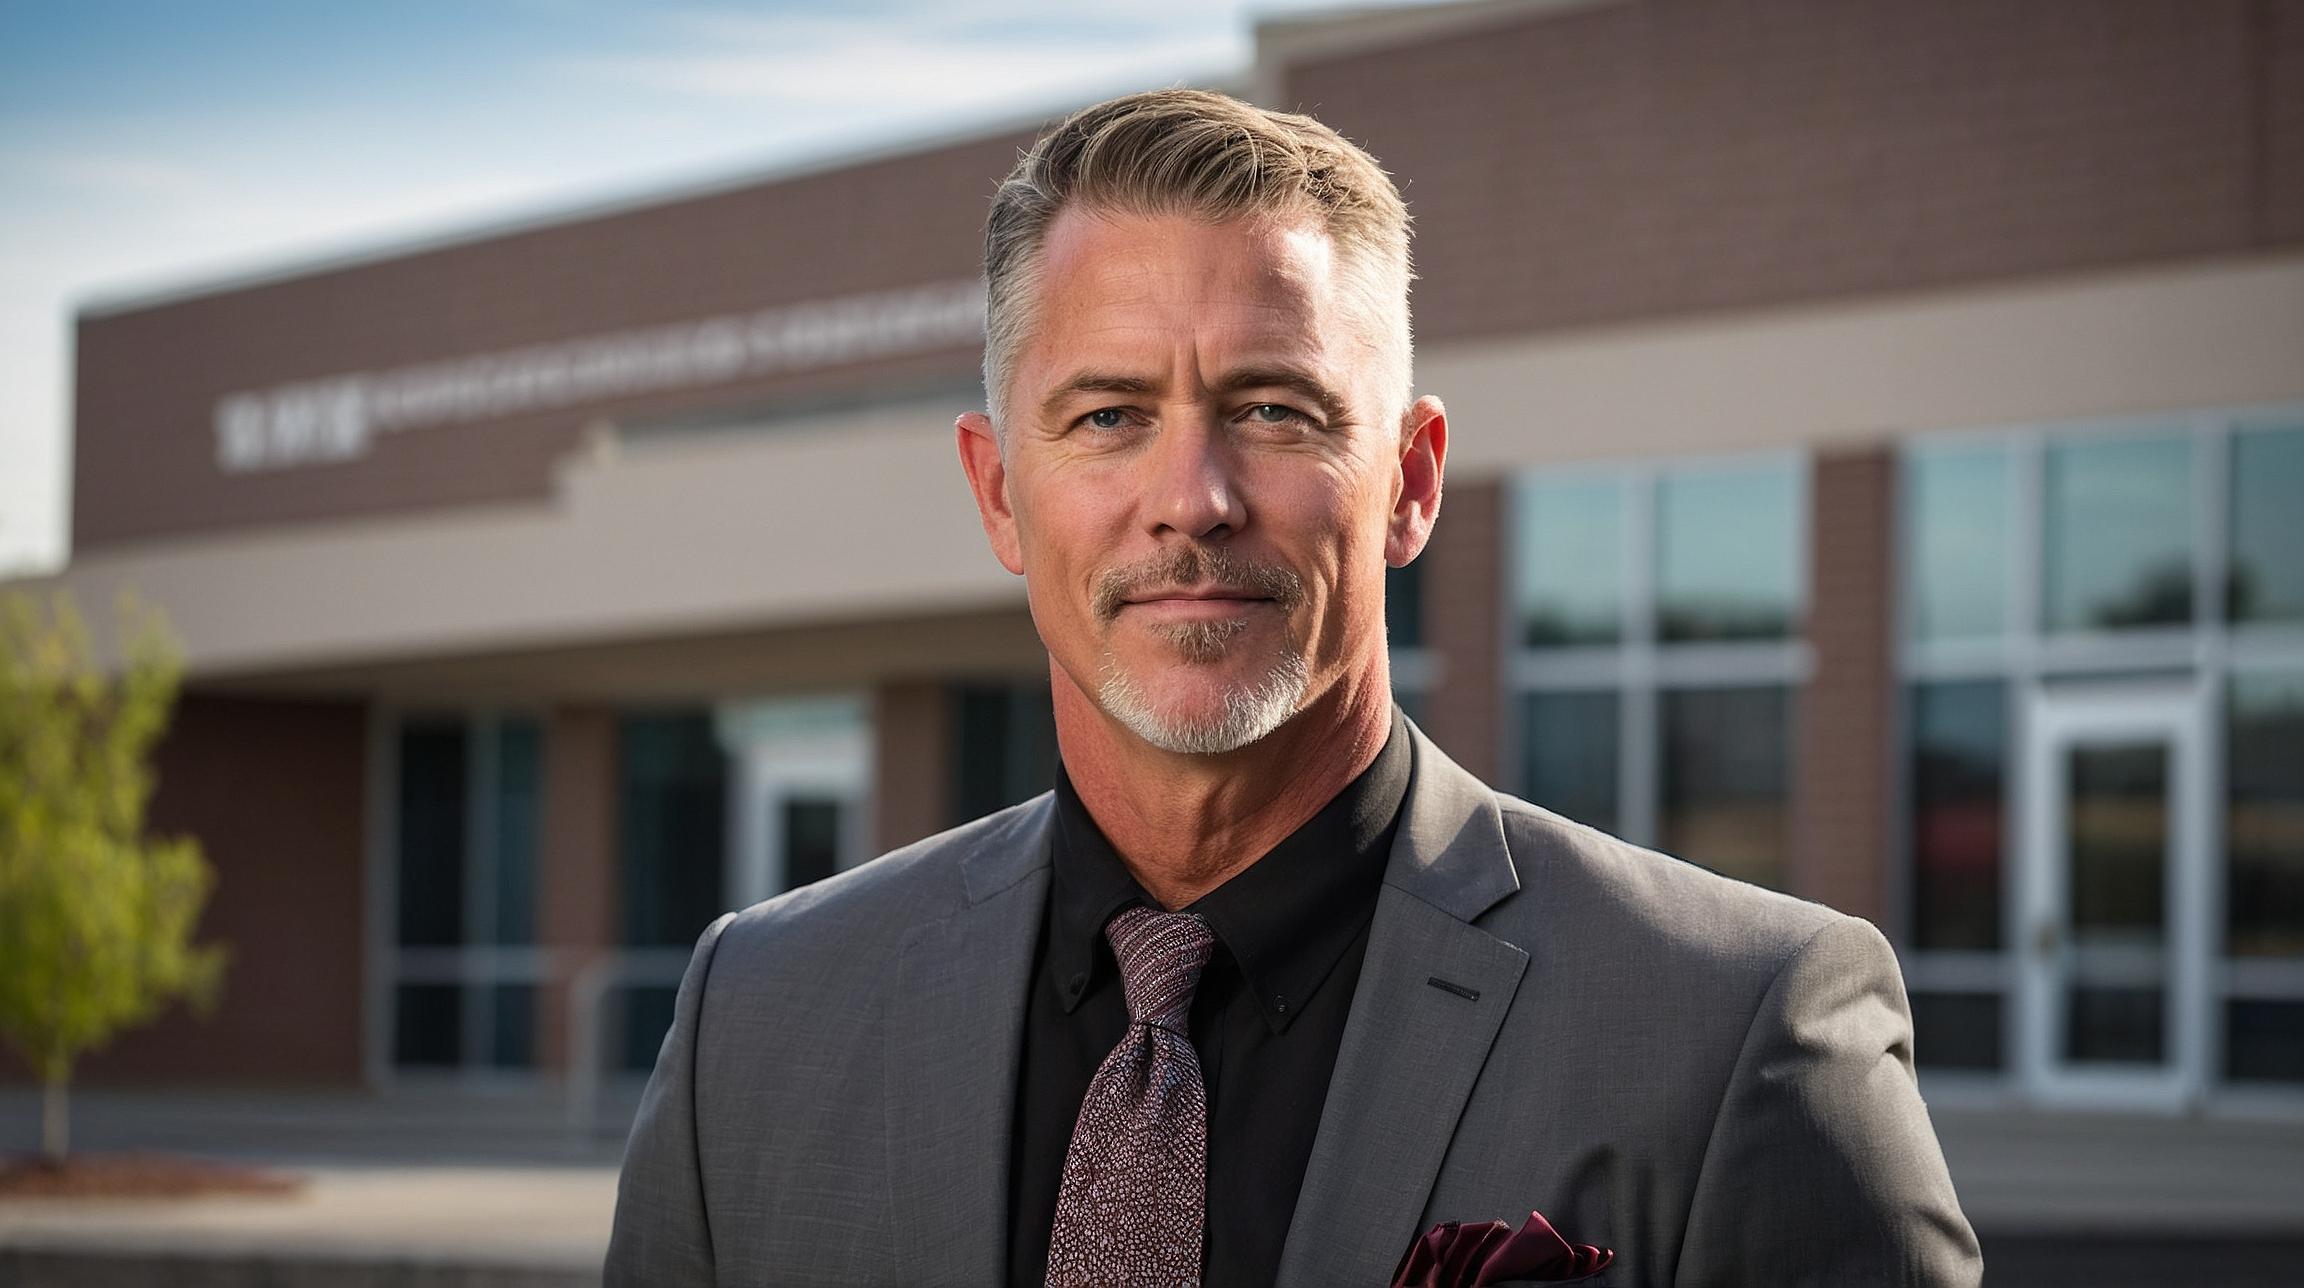 Moses Lake School District Hires New Finance Executive Amid Layoffs | FinOracle